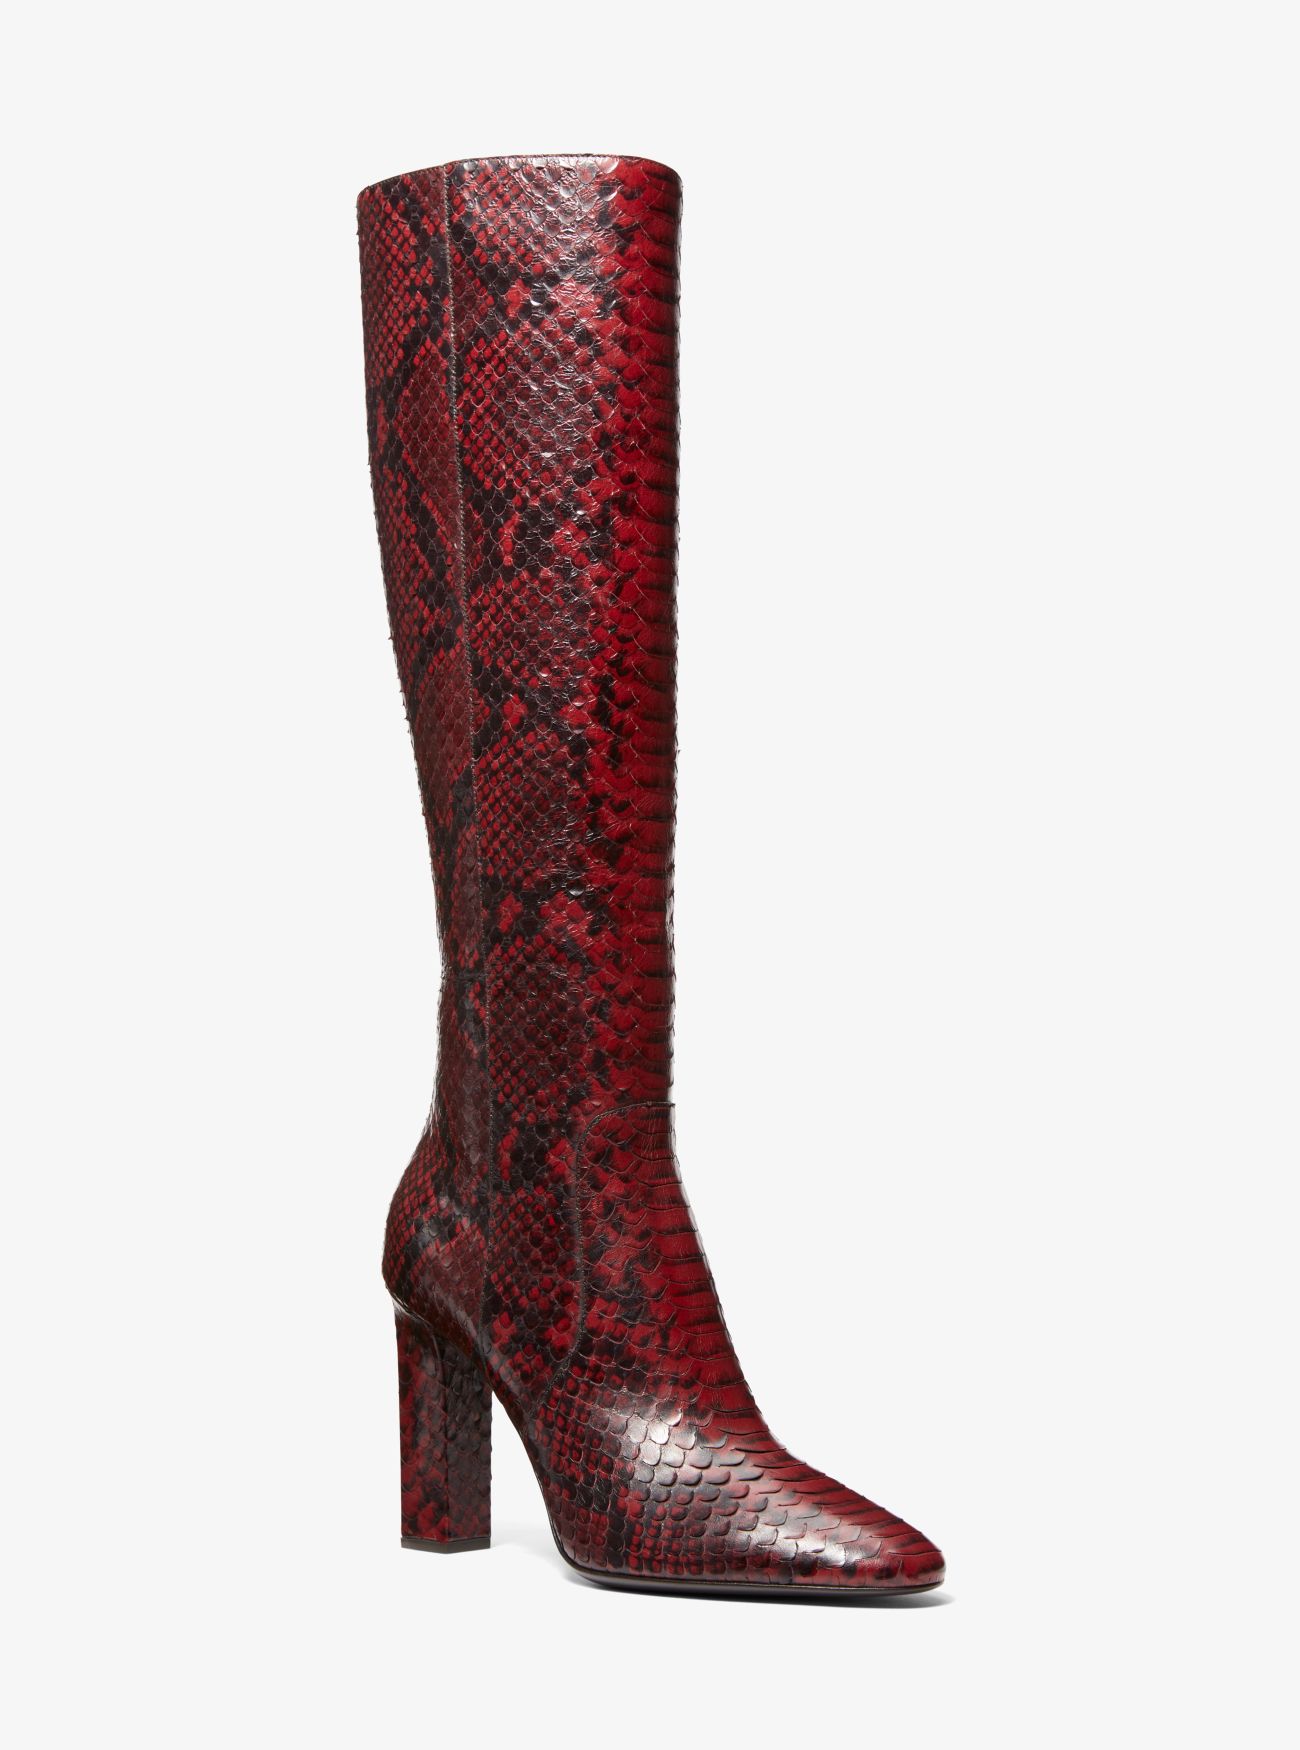 MK Carly Python Embossed Leather Boot - Red - Michael Kors